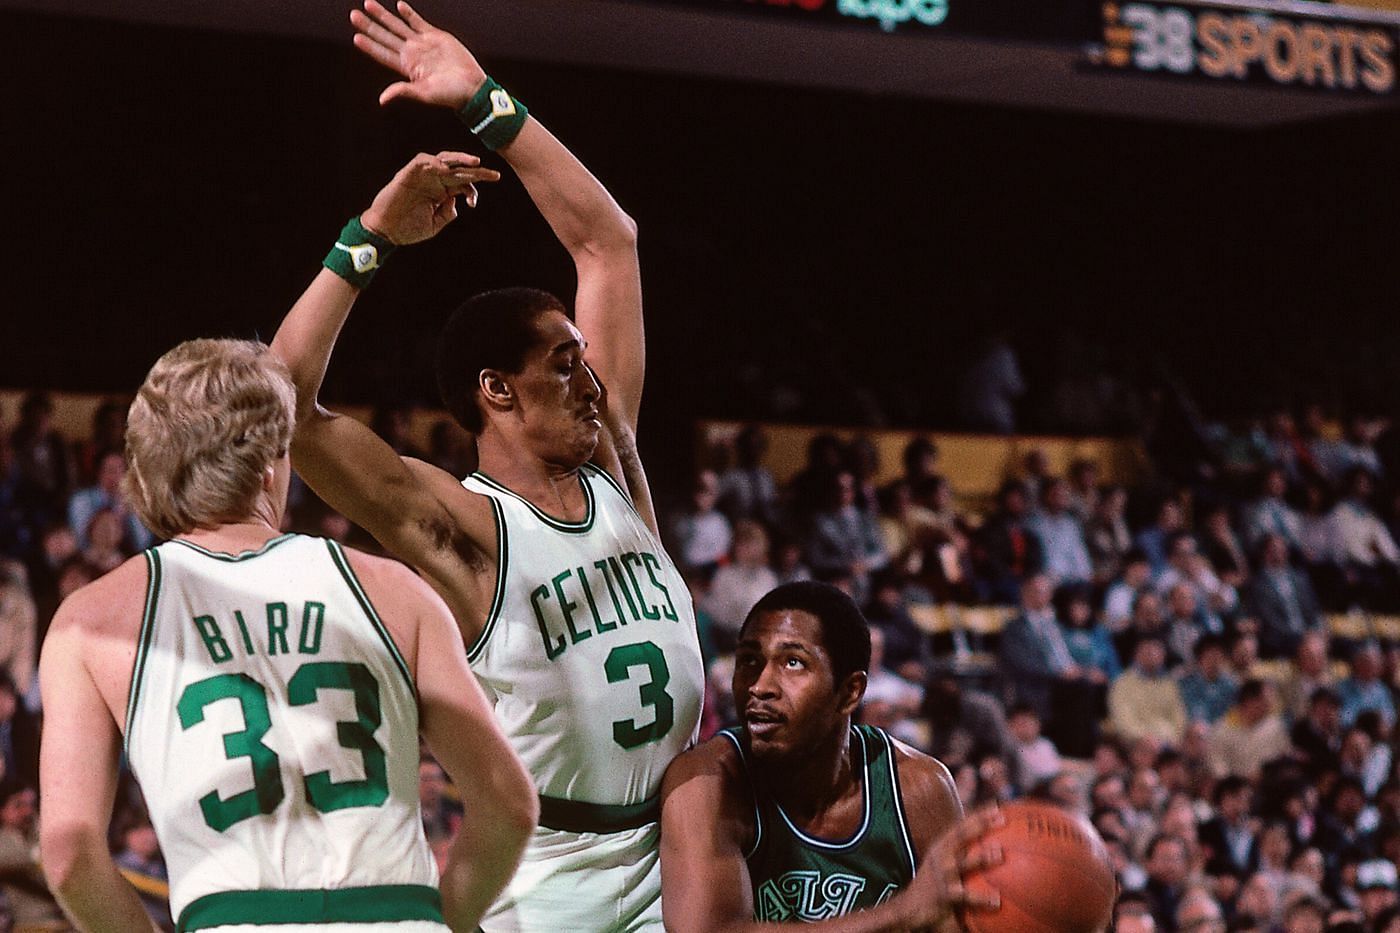 According to Skip Bayless, Mark Aguirre admitted to him that he was terrorized by Larry Bird&#039;s abilities and trash-talking. [Photo: Duke Basketball Report]